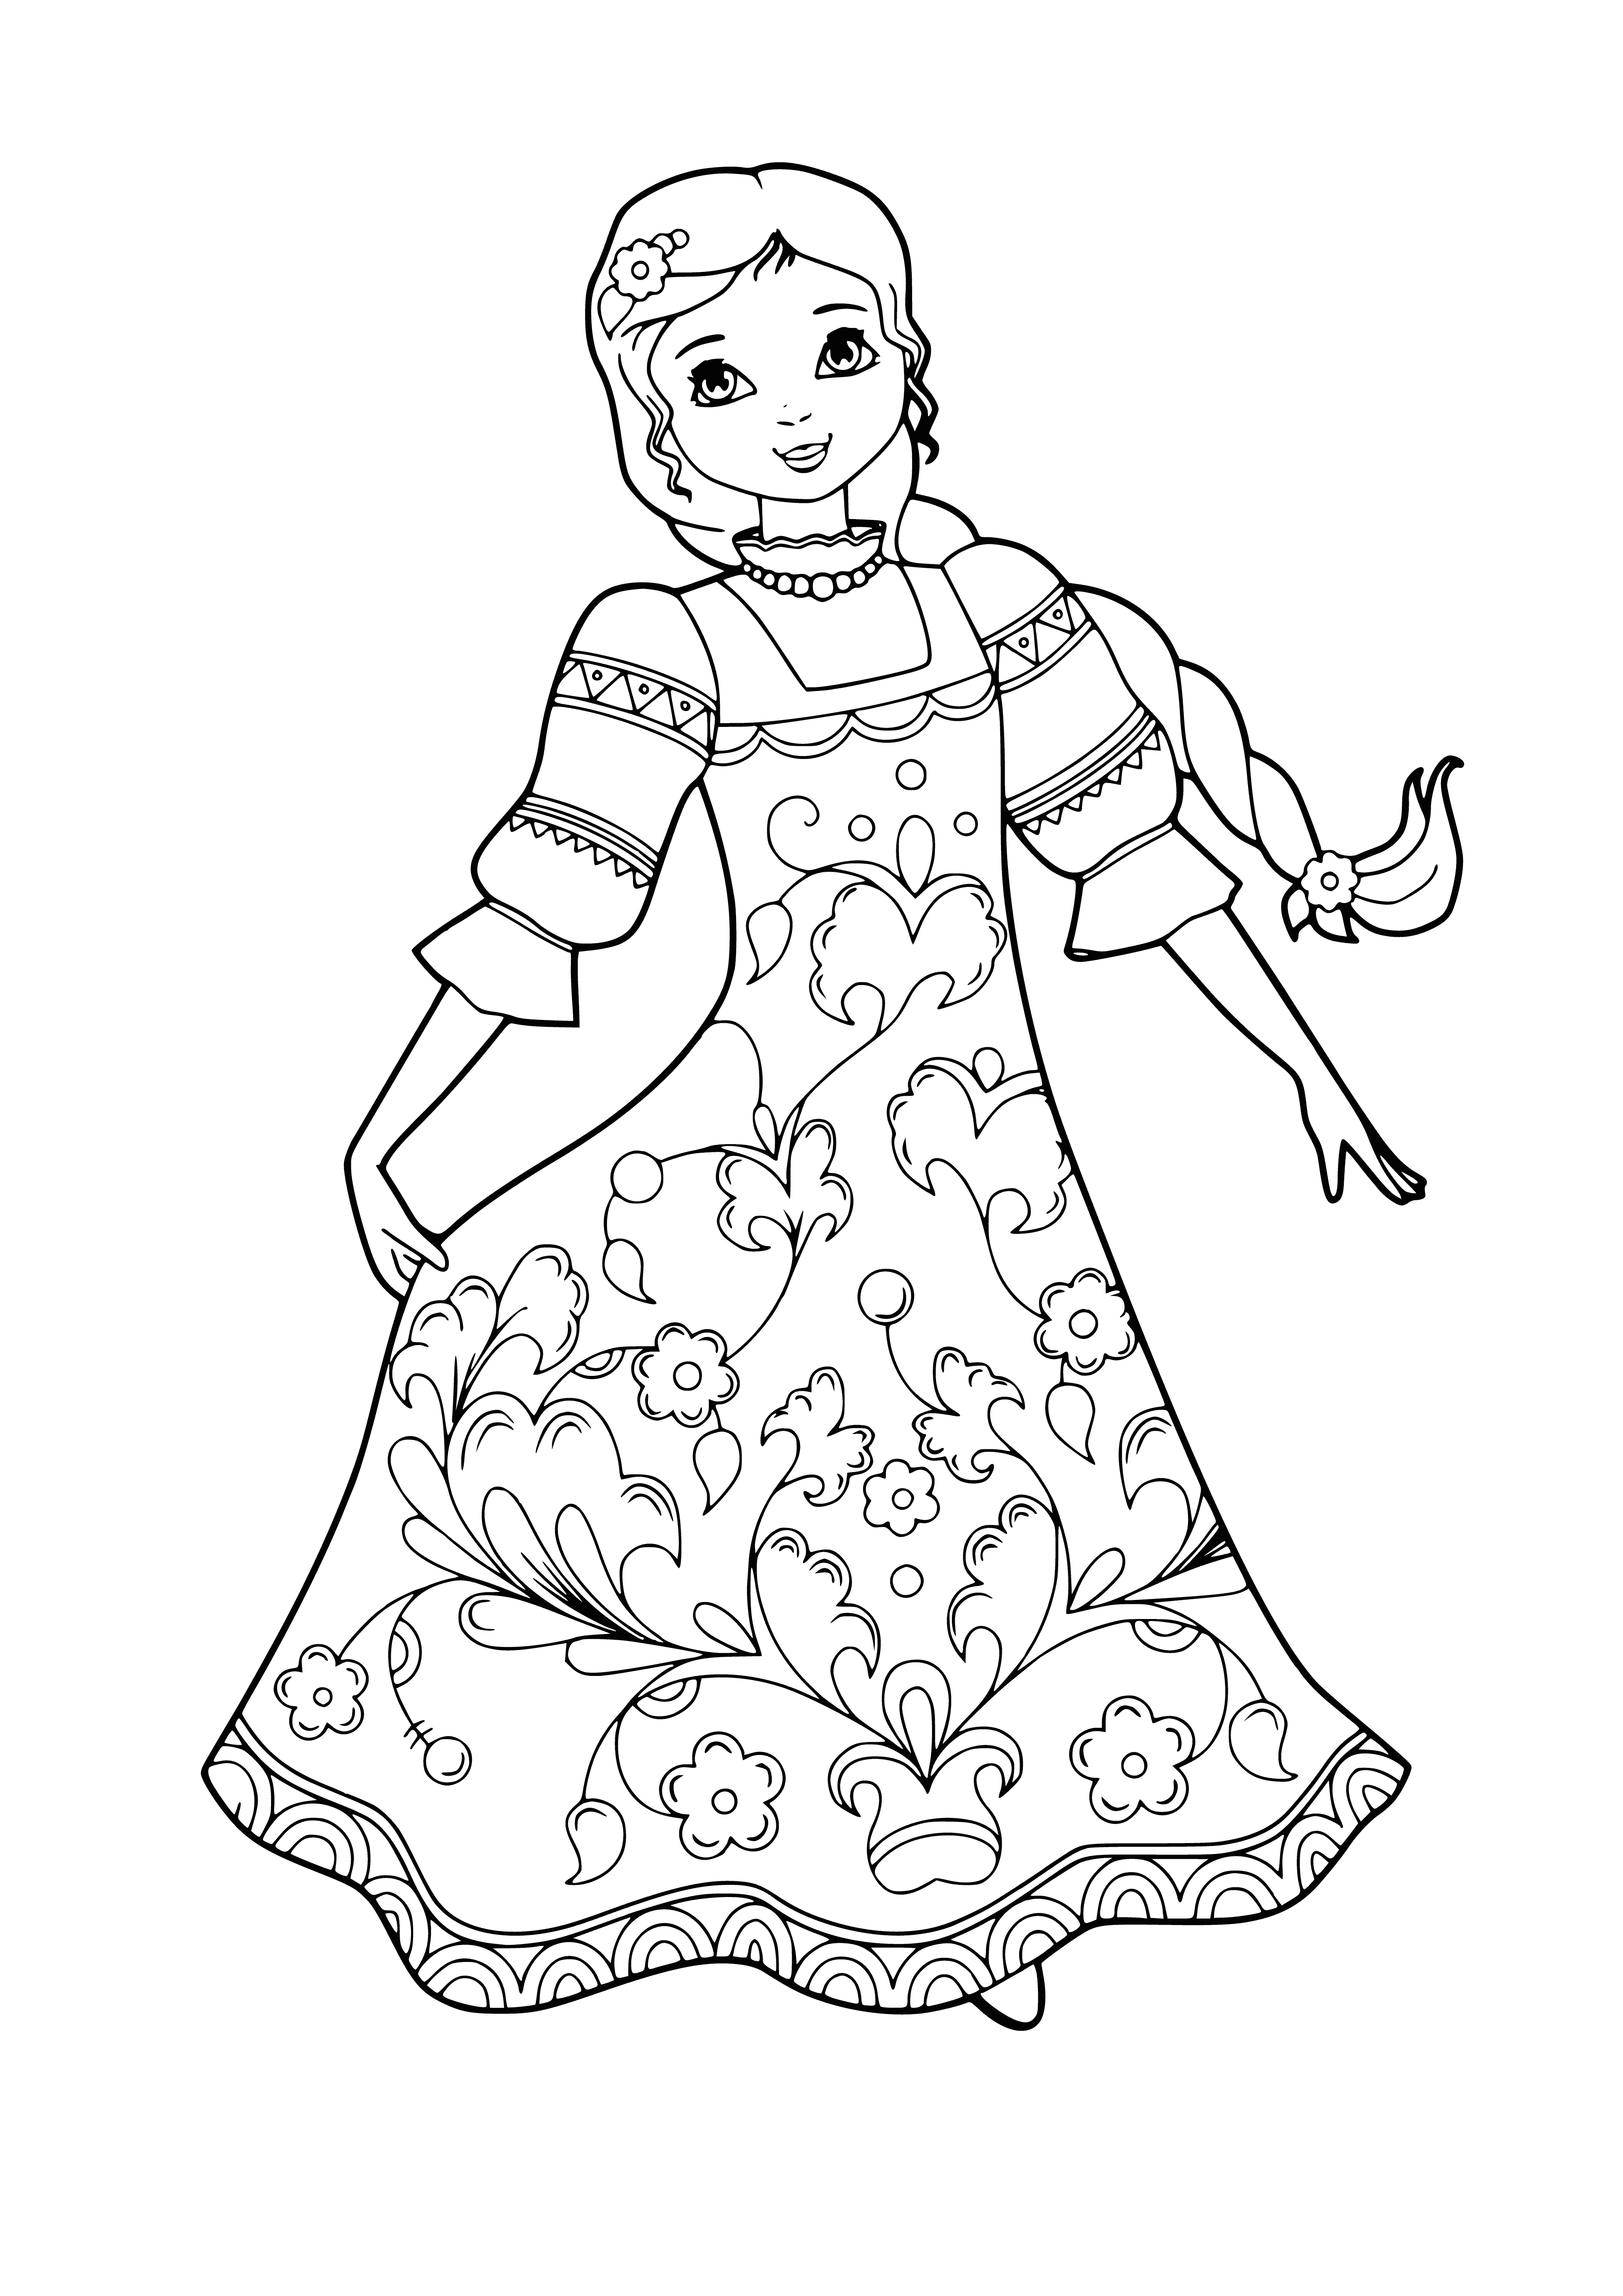 coloring page: A Russian beauty in traditional dress with a red scarf gazes over a snowy landscape. #Russia #Fashion #Snow